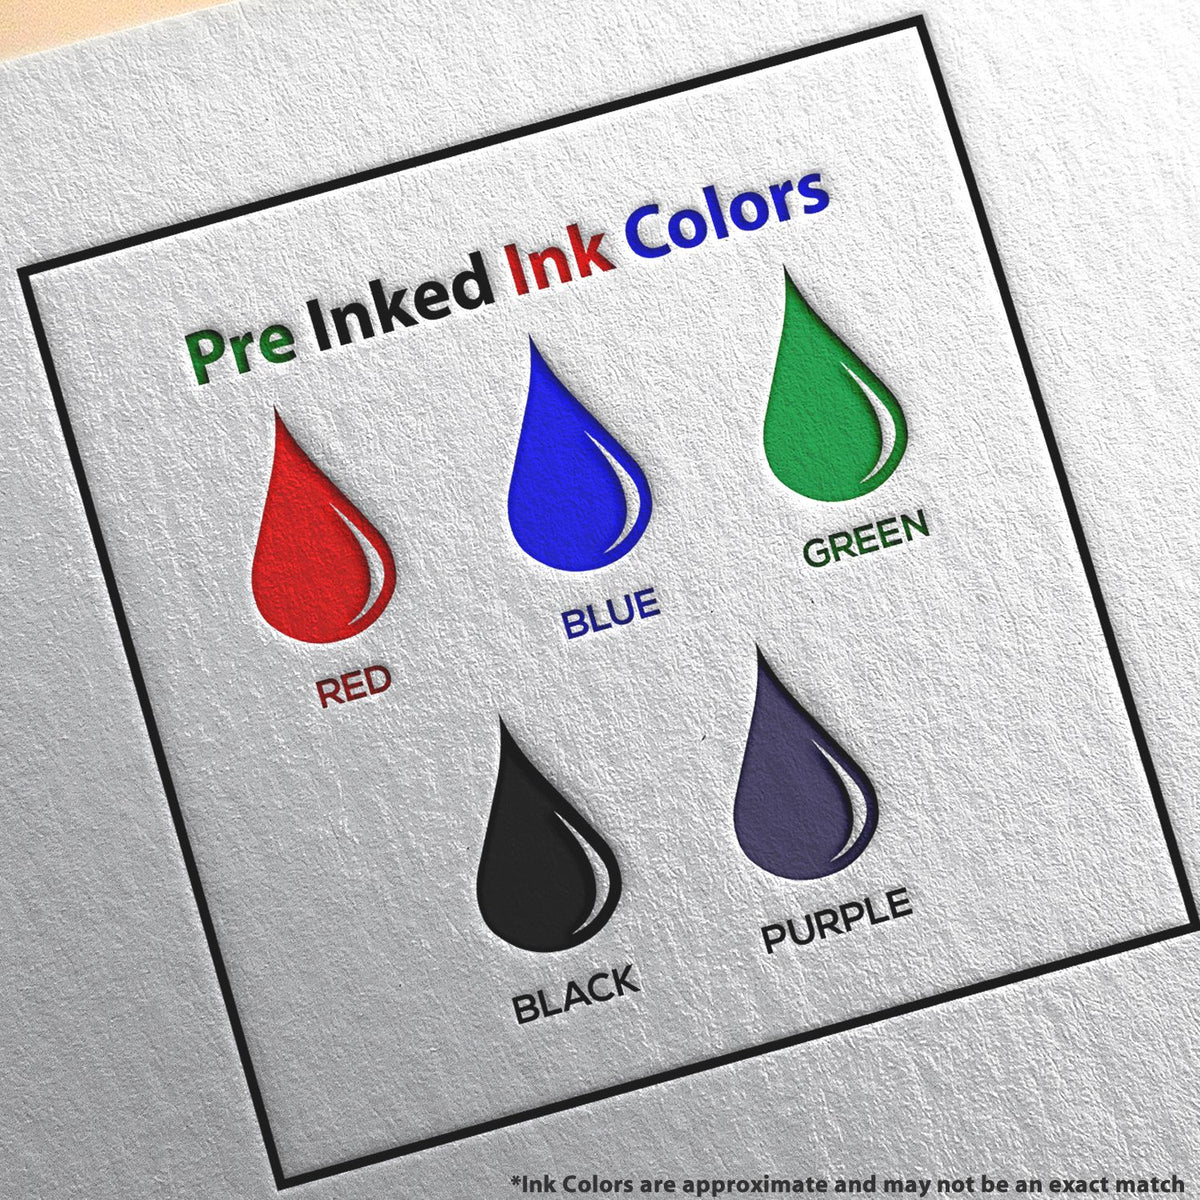 A picture showing the different ink colors or hues available for the Slim Pre-Inked Hawaii Professional Engineer Seal Stamp product.